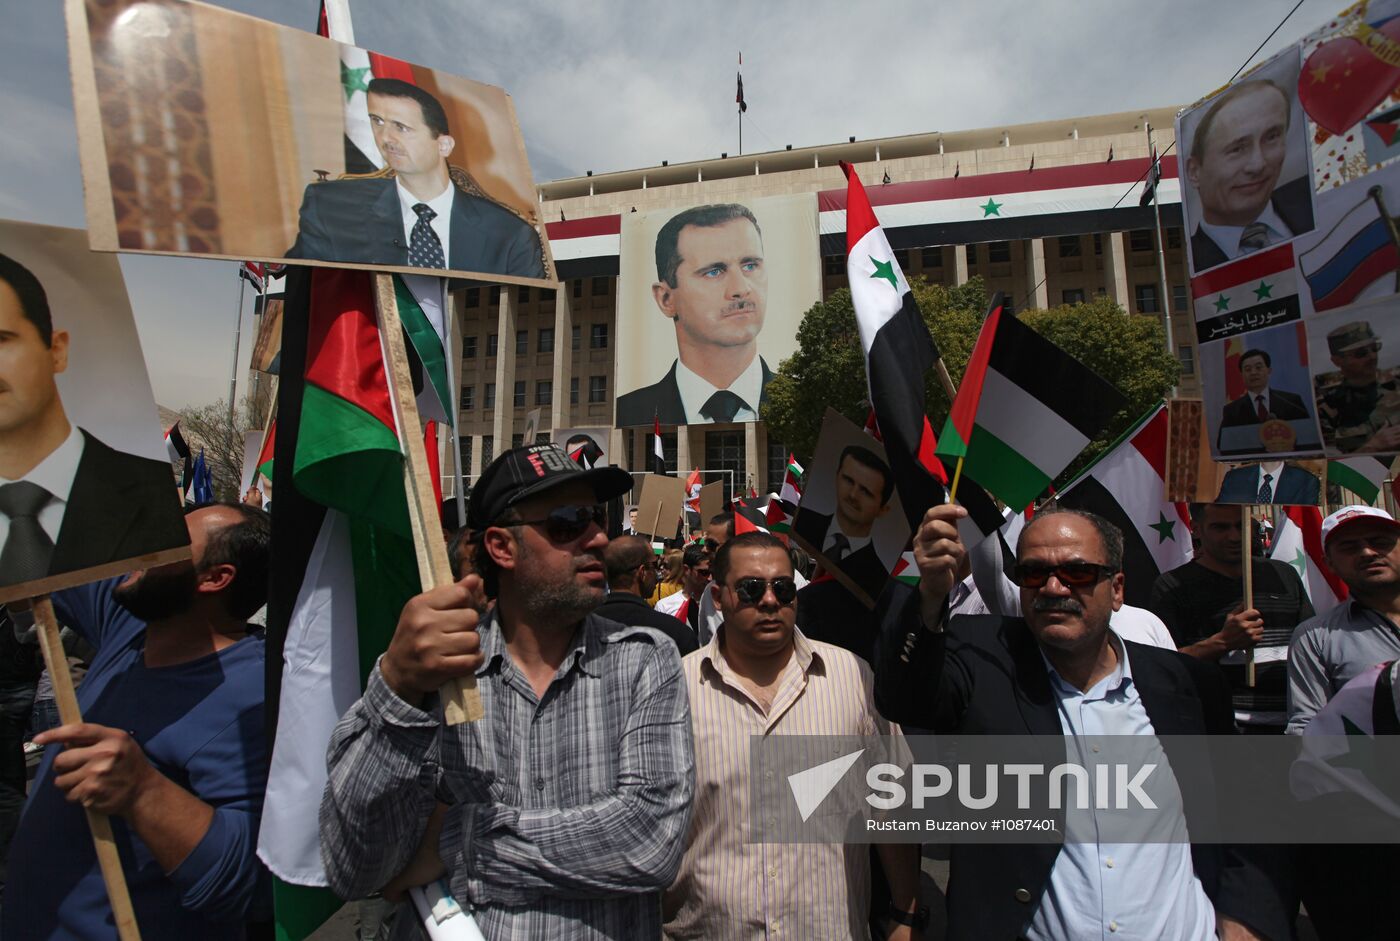 Rally in support of authorities in Syria